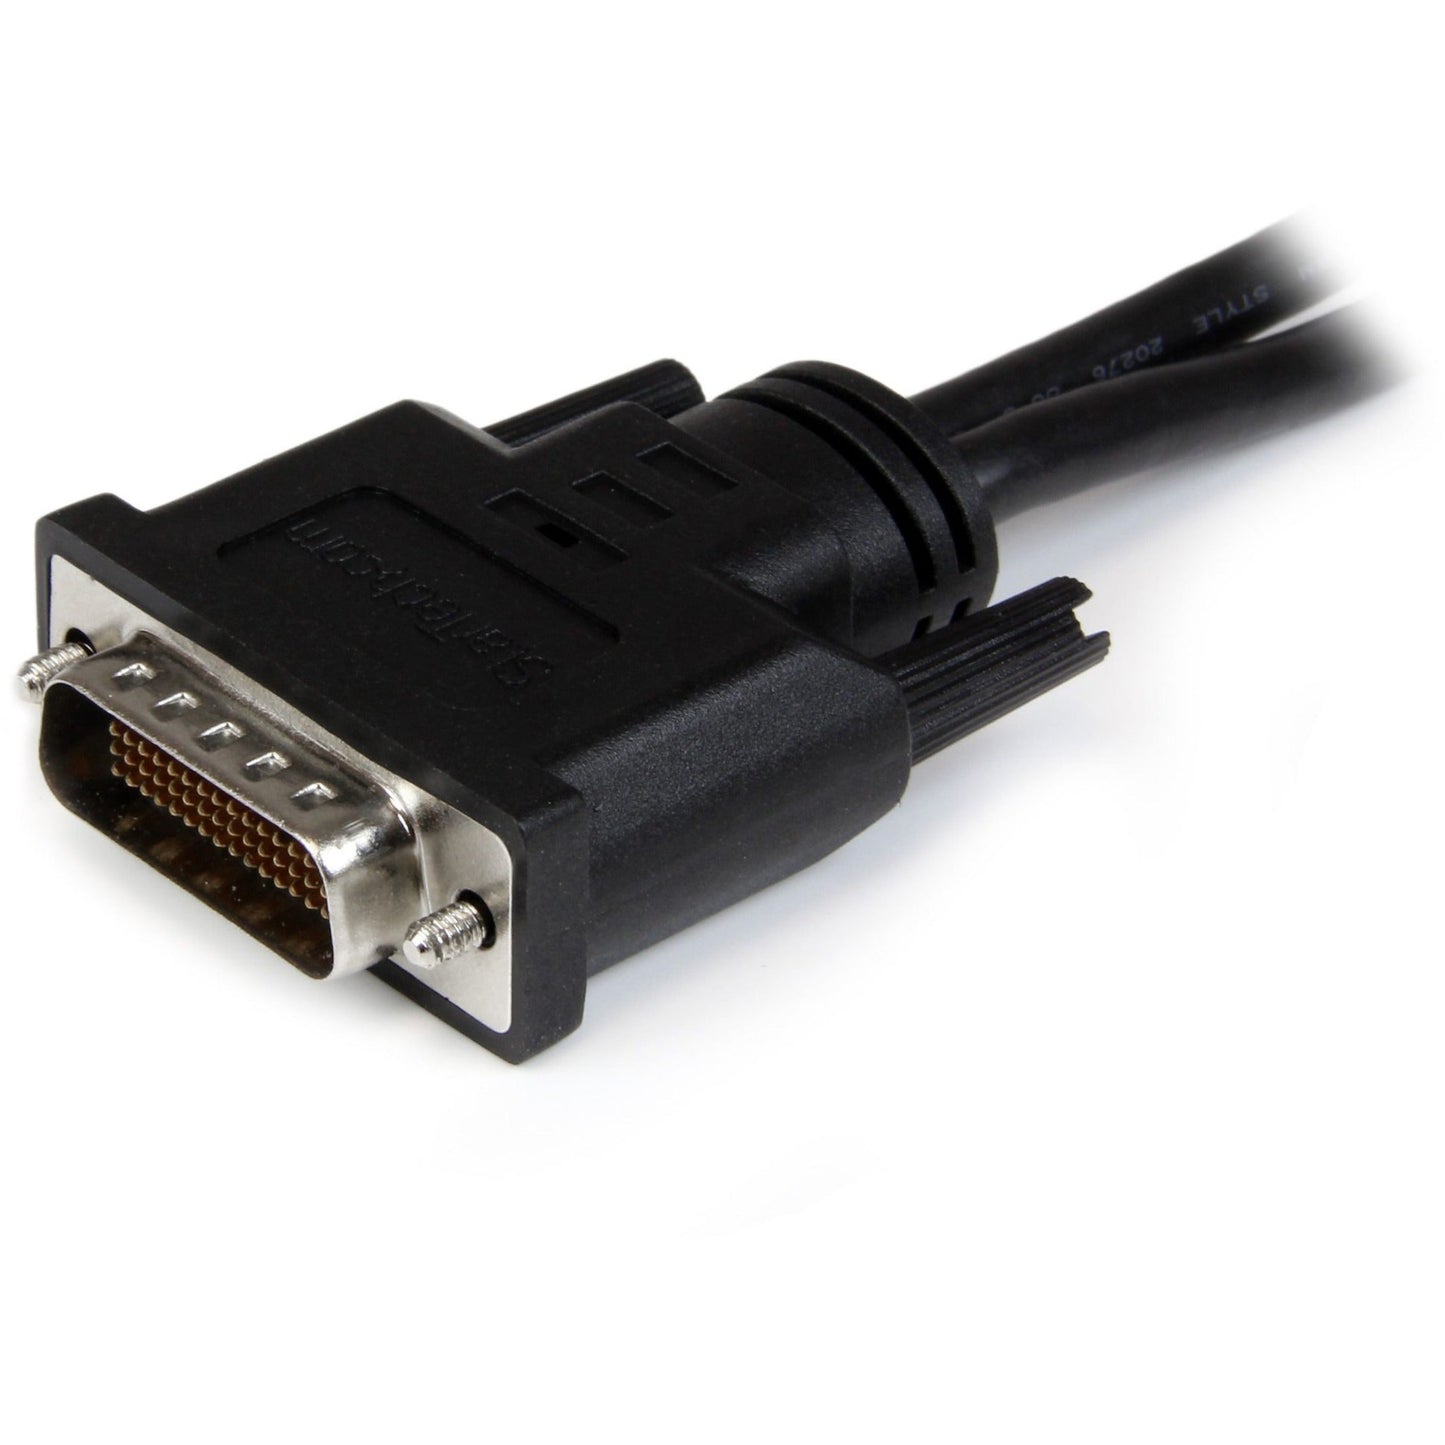 StarTech.com 8" DMS-59 to Dual DisplayPort Adapter Cable 4K x 2K DMS 59 pin (M) to 2x DP 1.2 (F) Splitter Y Cable LFH to 2x DP Monitors